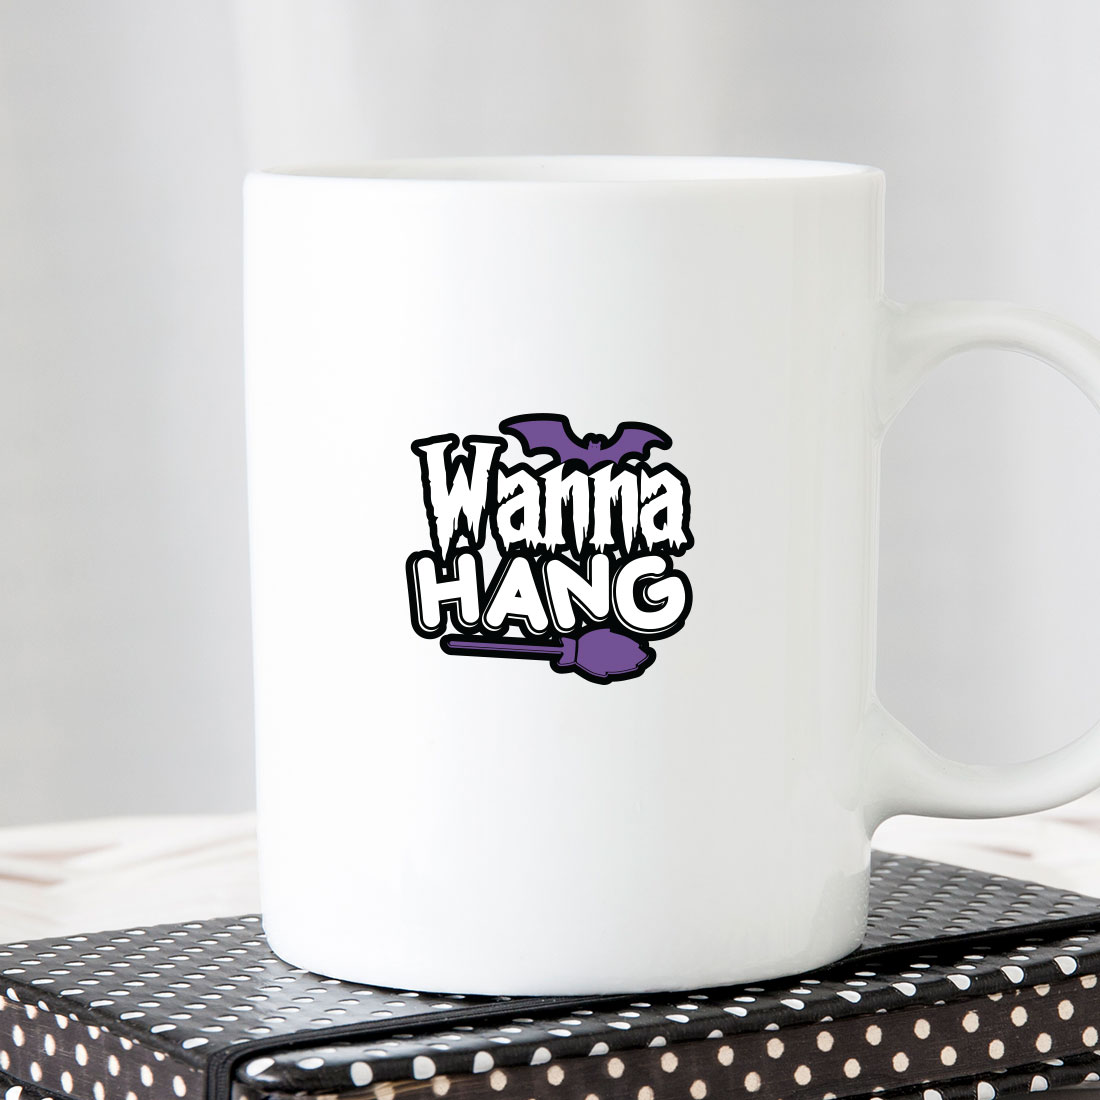 White coffee mug with the words wanna hang on it.